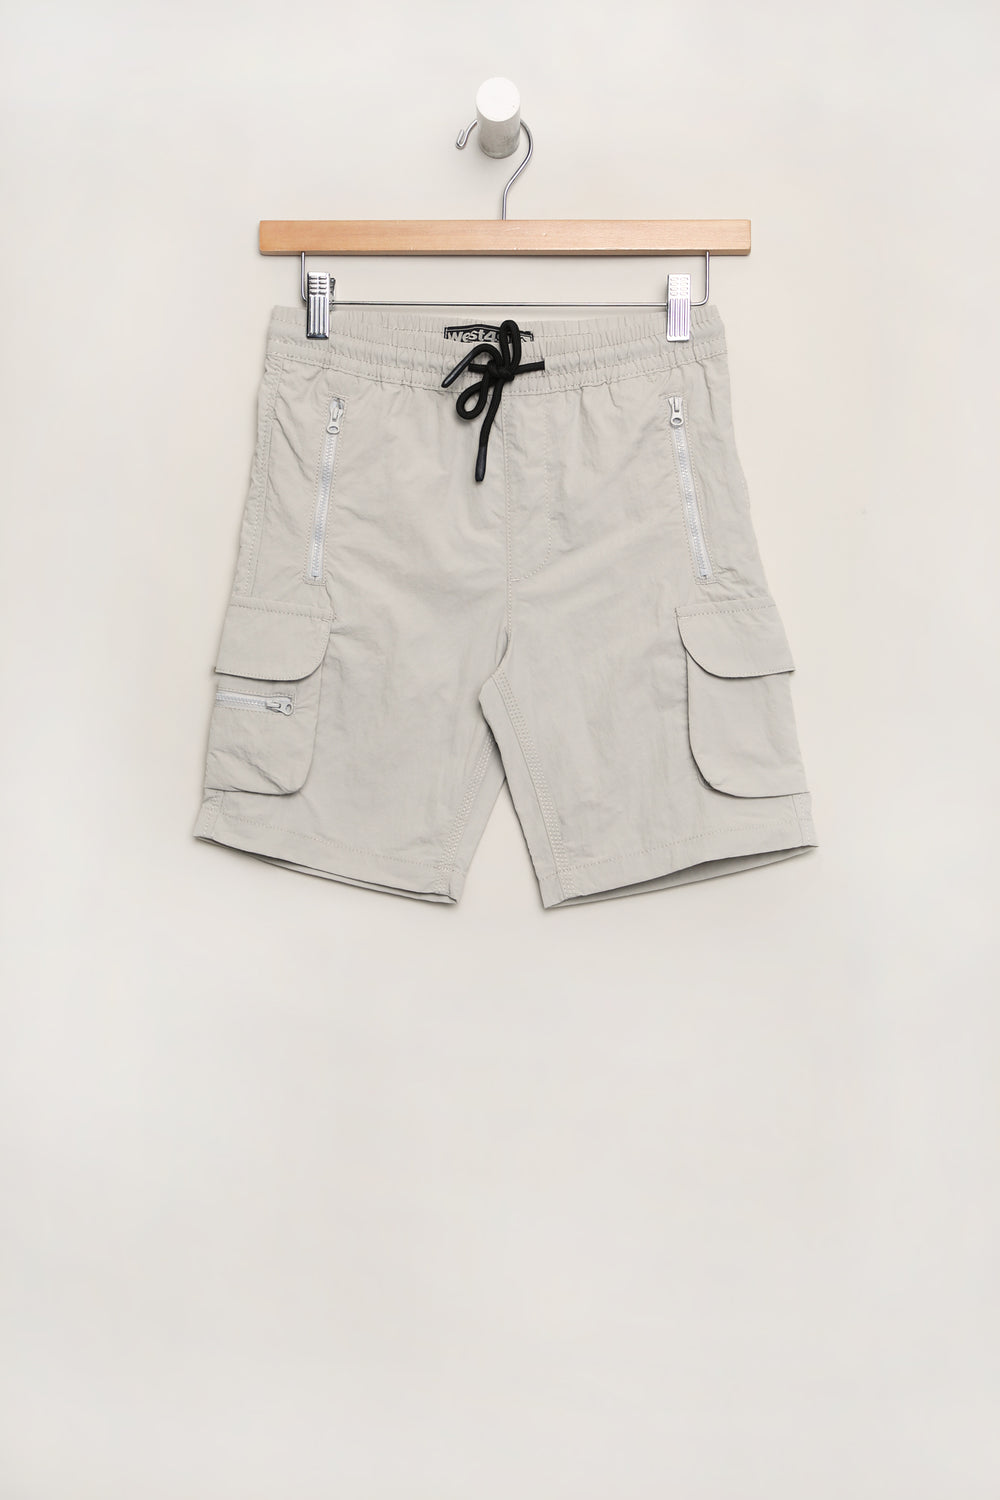 West49 Youth Nylon Cargo Short with Zip West49 Youth Nylon Cargo Short with Zip